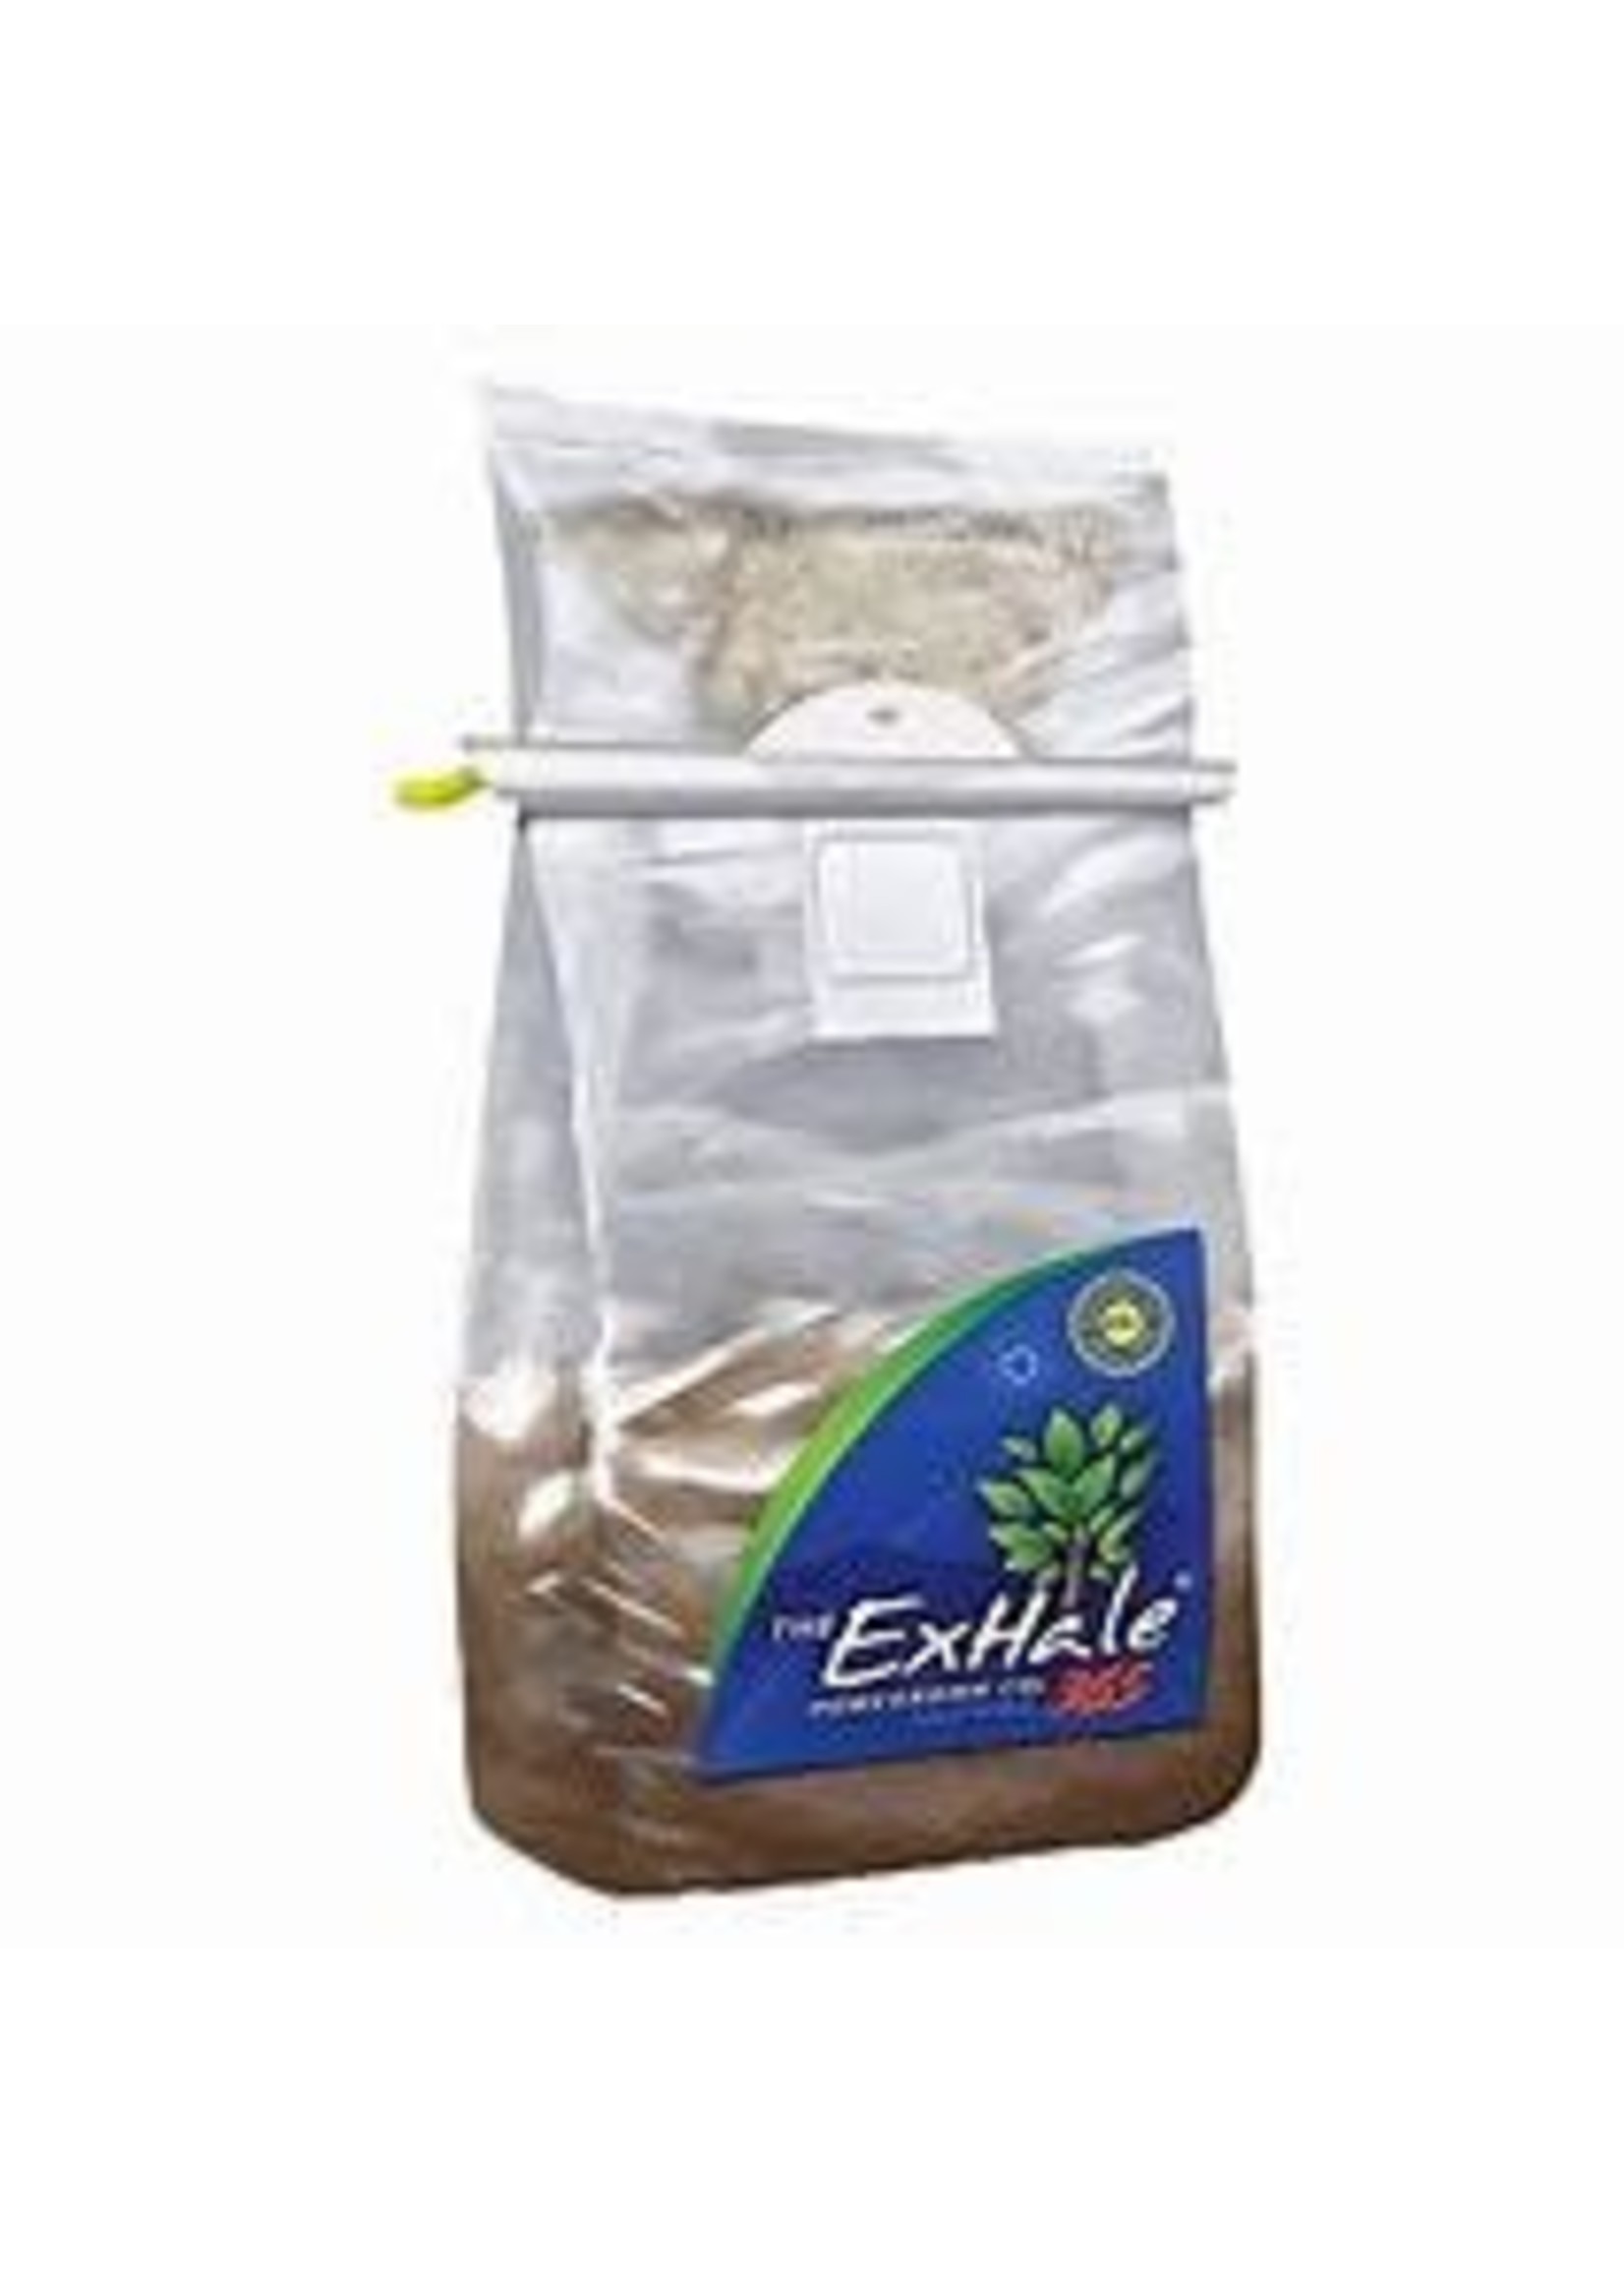 Exhale Exhale 365 Homegrown Climate control and CO2 Bag